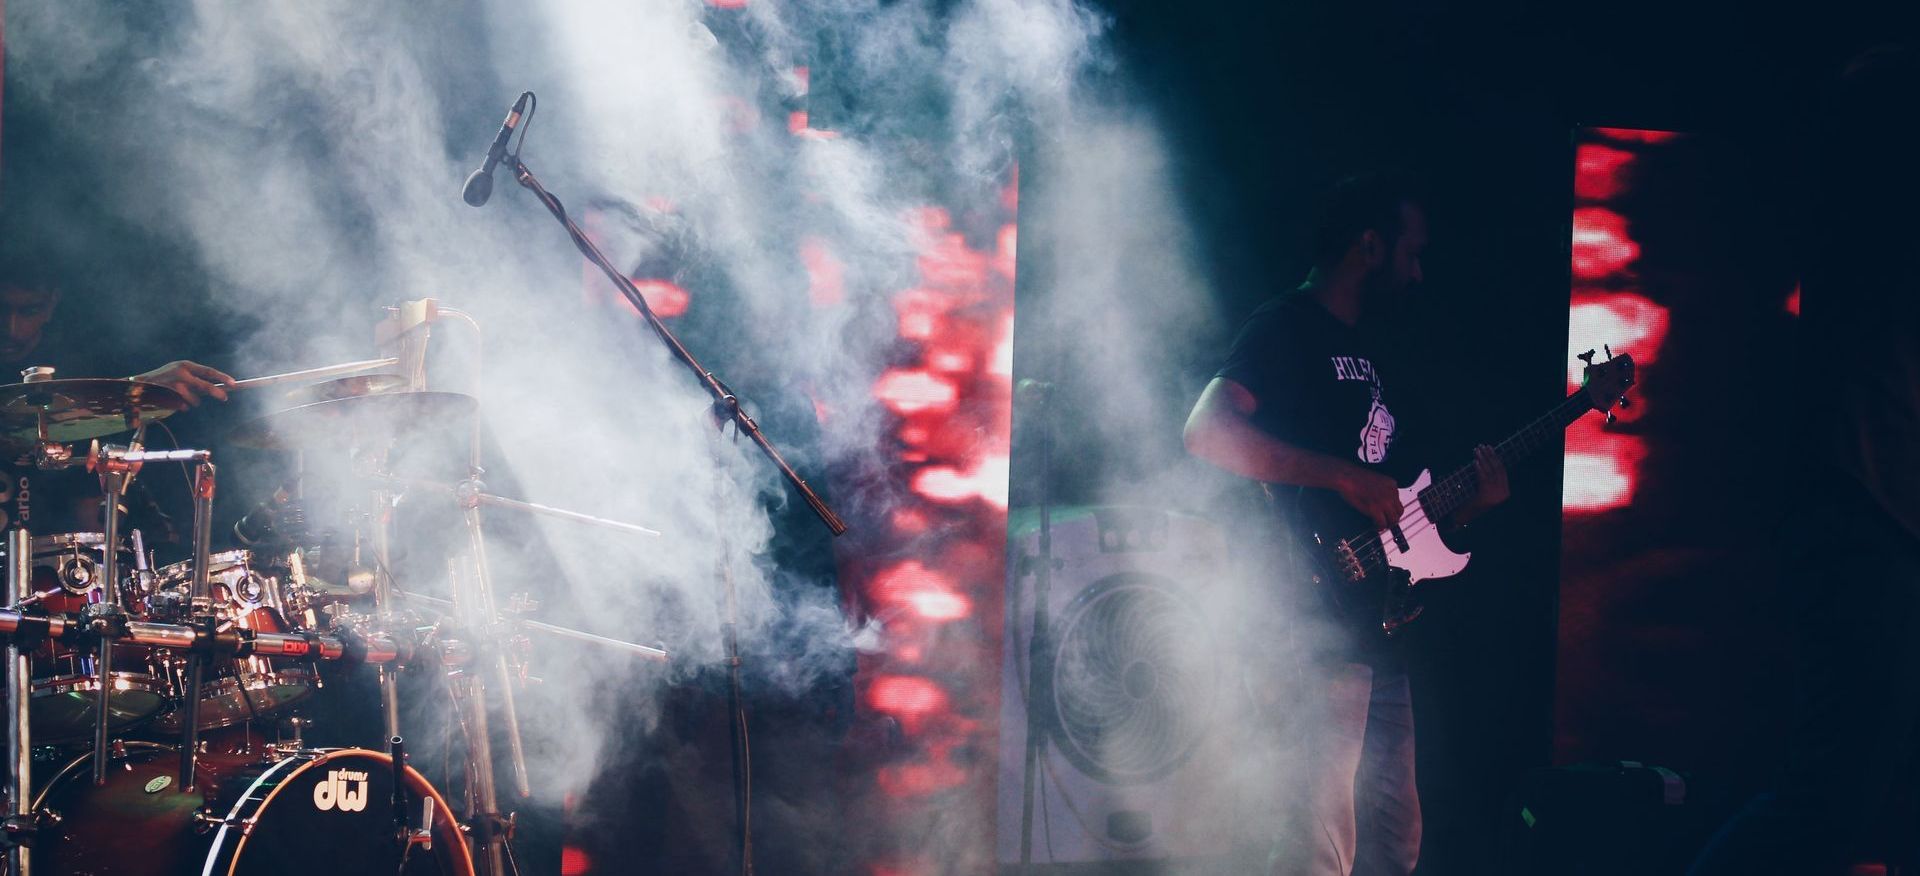 a drum set and guitarist bathed in smoke special effects and light cutting through them.